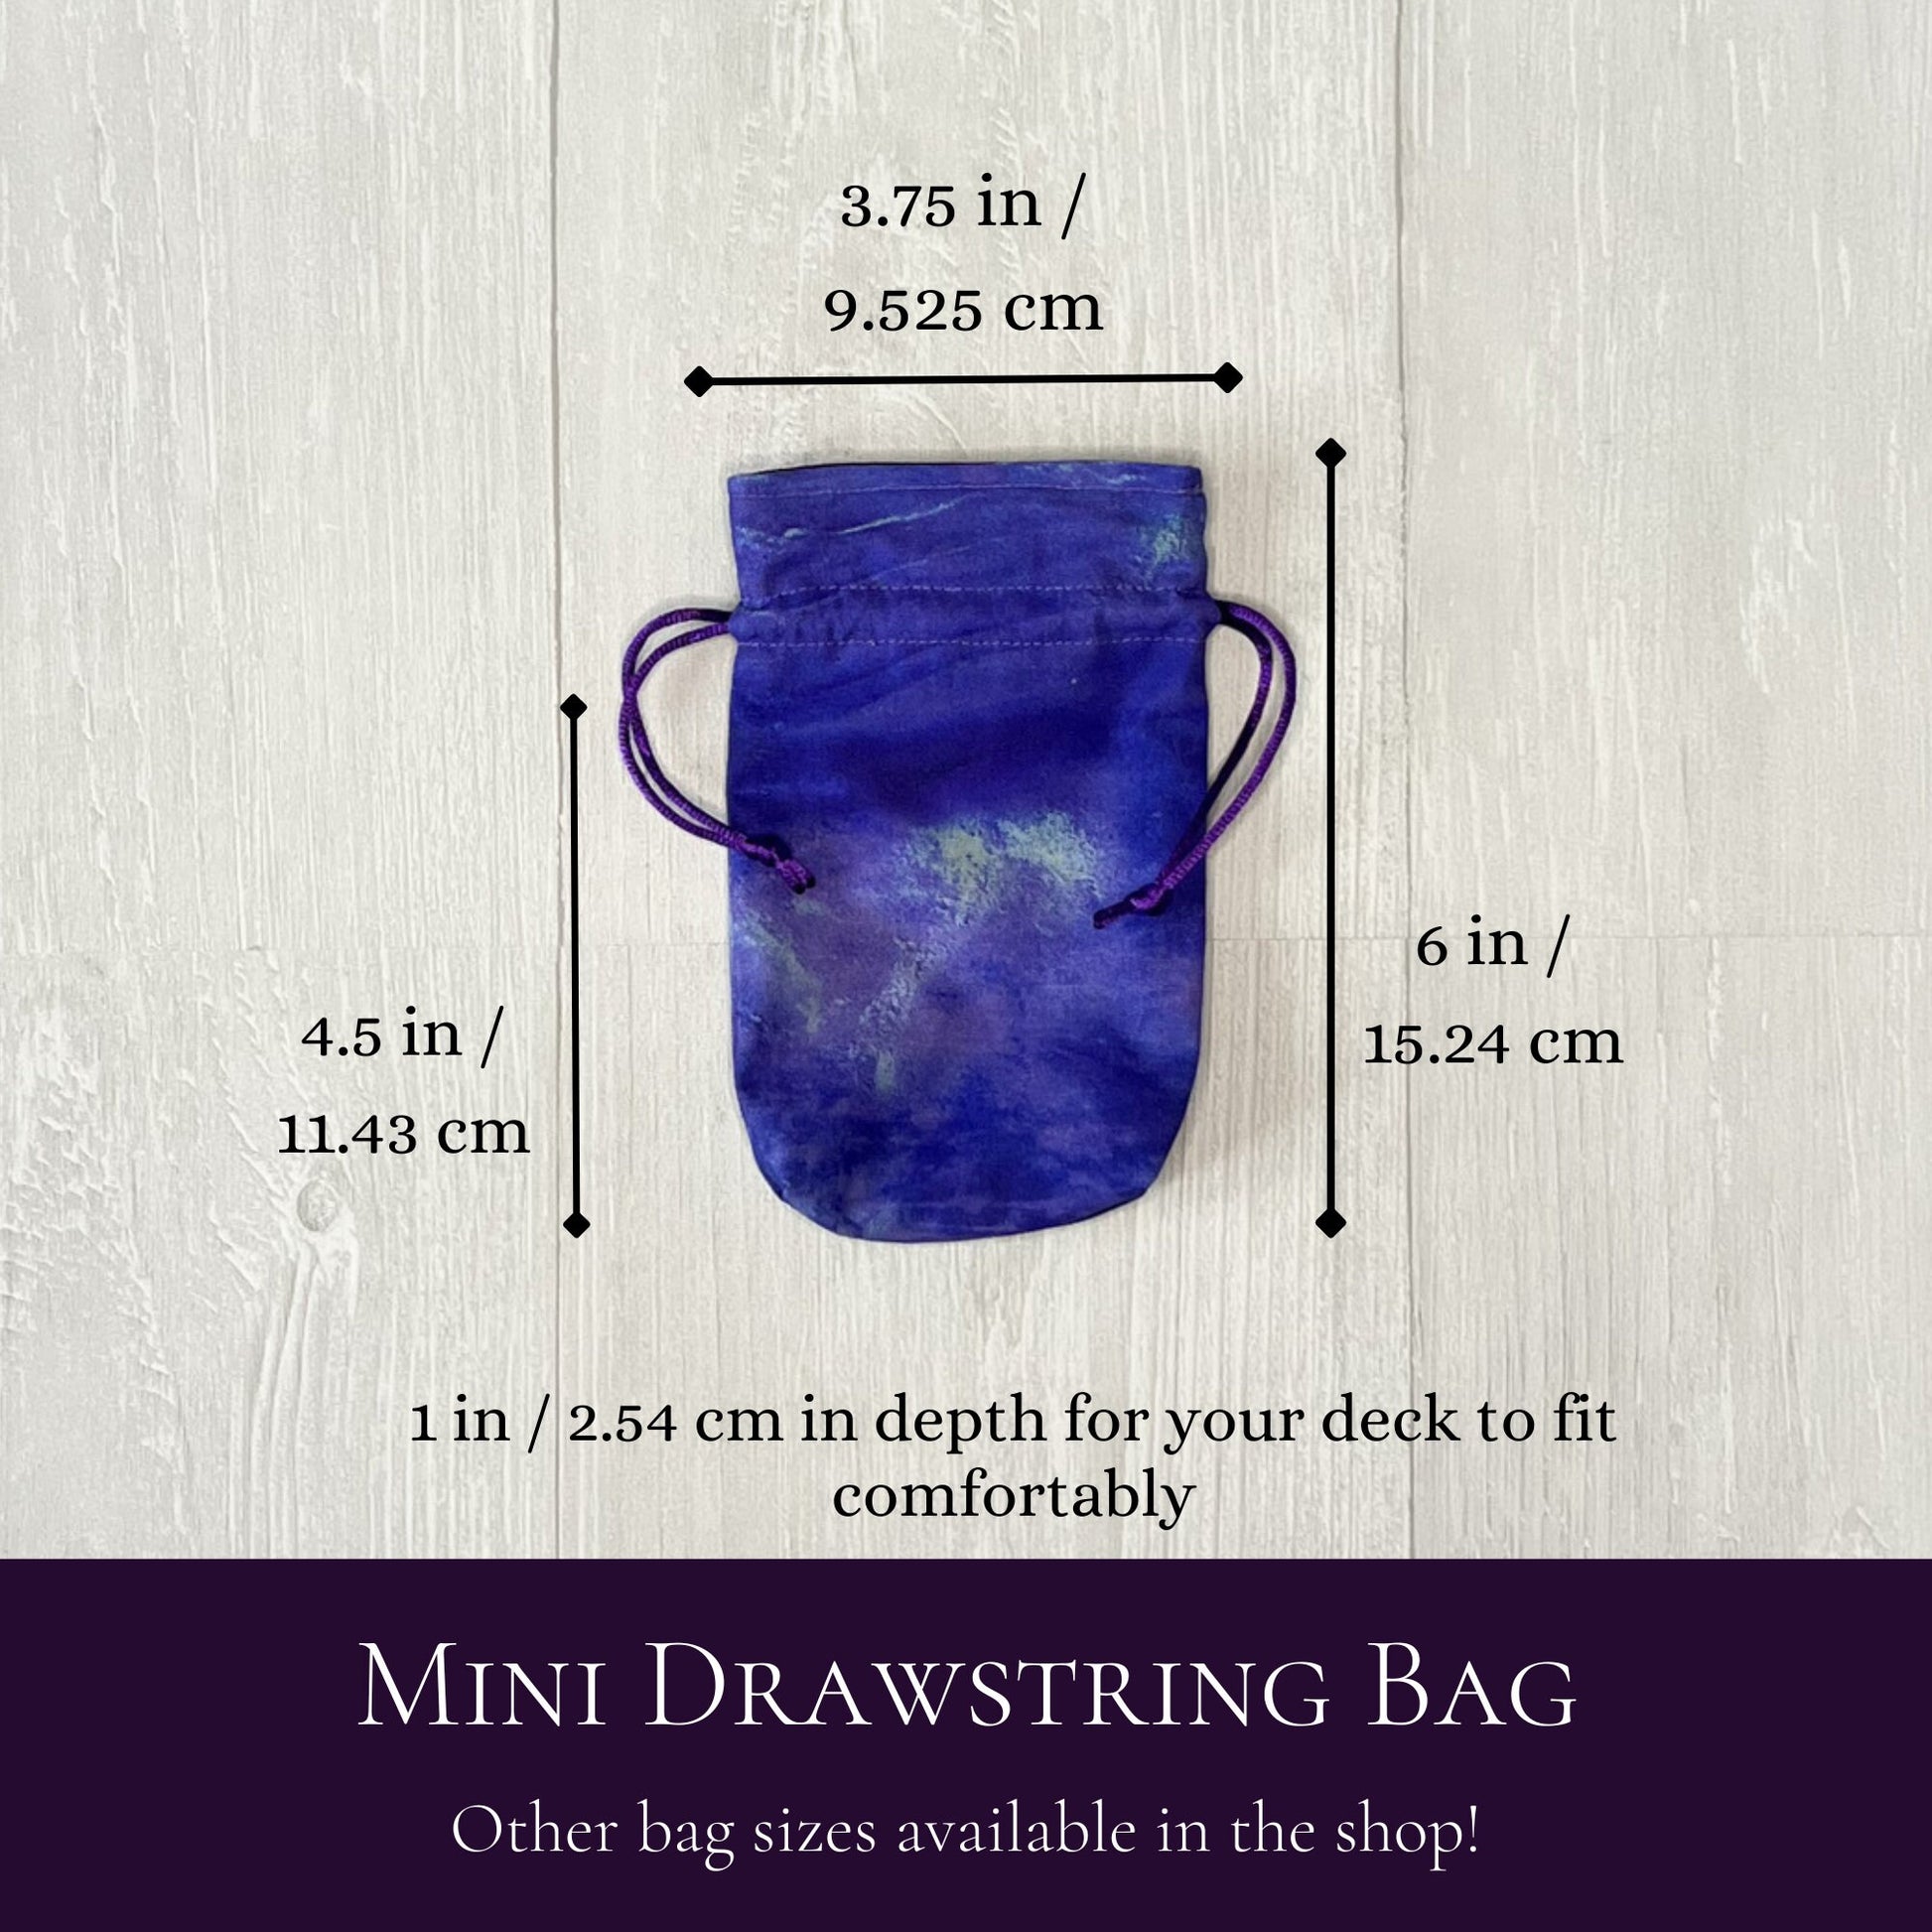 Mini Blue & Purple Tarot Deck Bag, Drawstring Pouch, Pocket Tarot, Dice Rune Crystal Bag, Witchcraft Wiccan Supplies Gift, Divination Tools